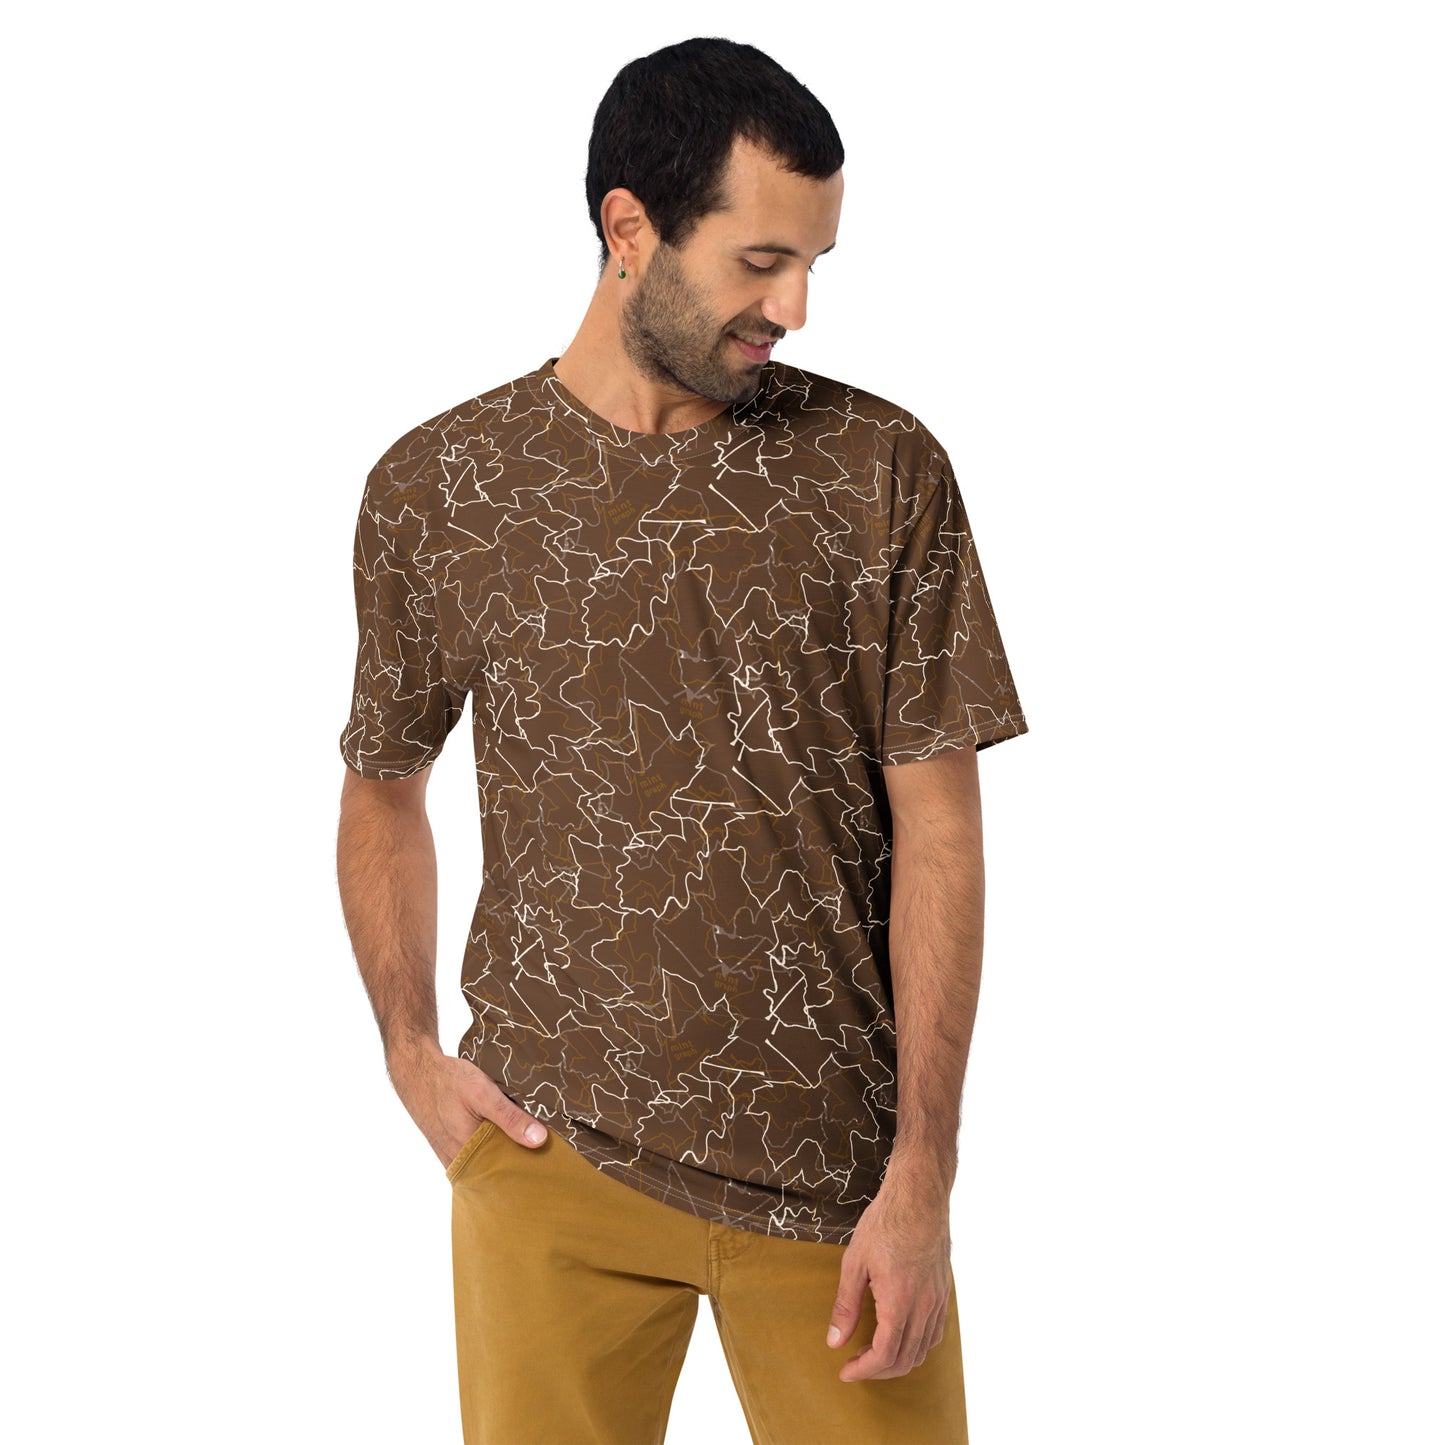 Men's t-shirt with allover print - brown leaves pattern design